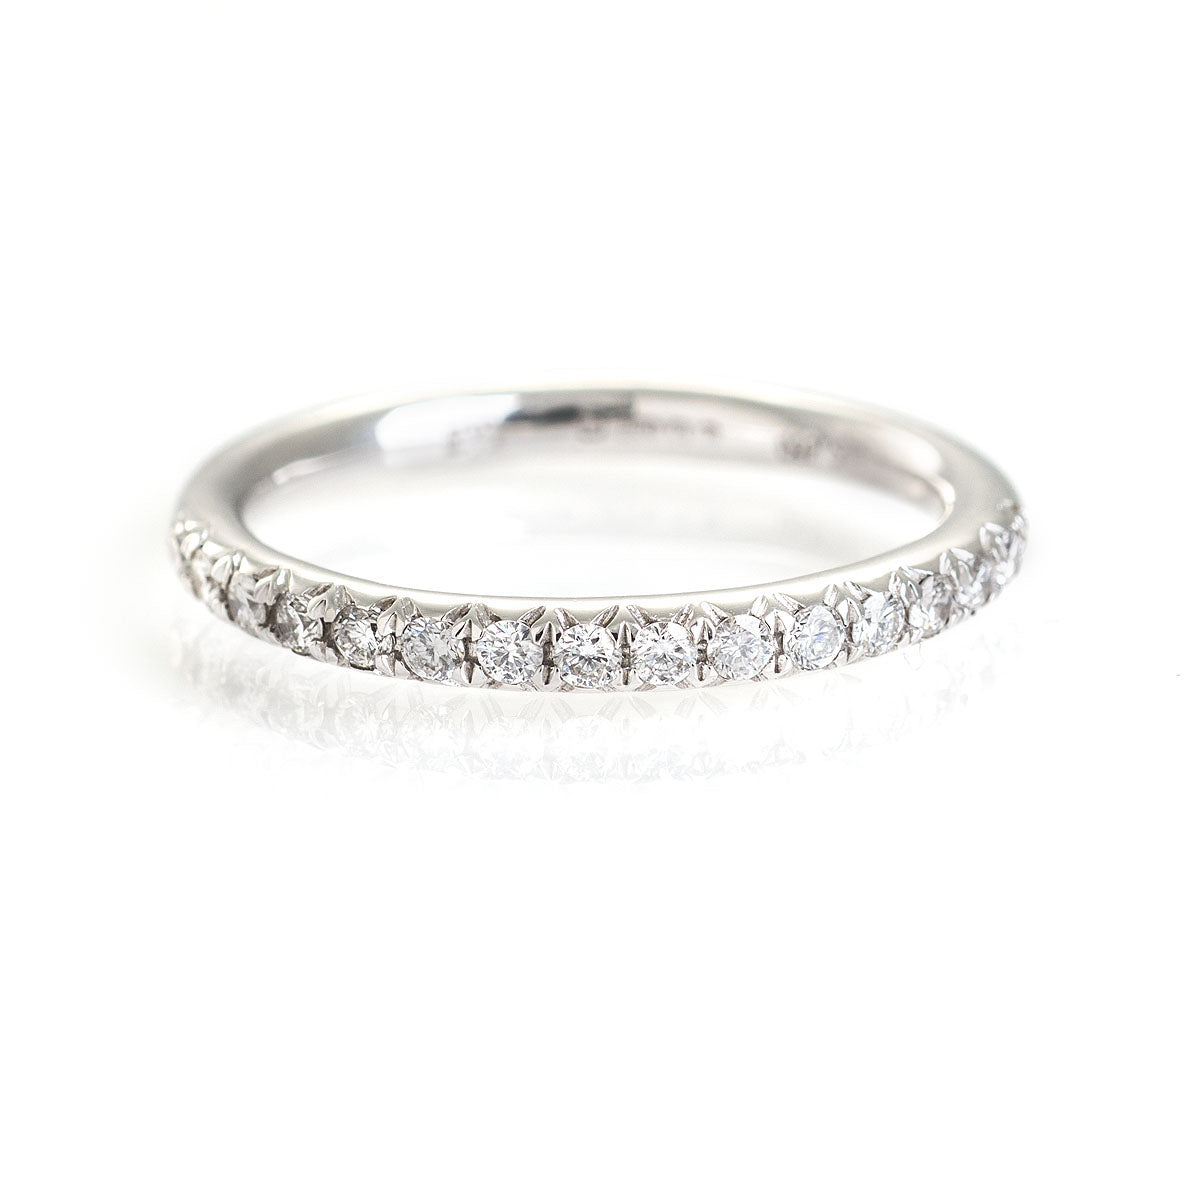 Wedding rings Birmingham for special occasions by Mitchel & Co